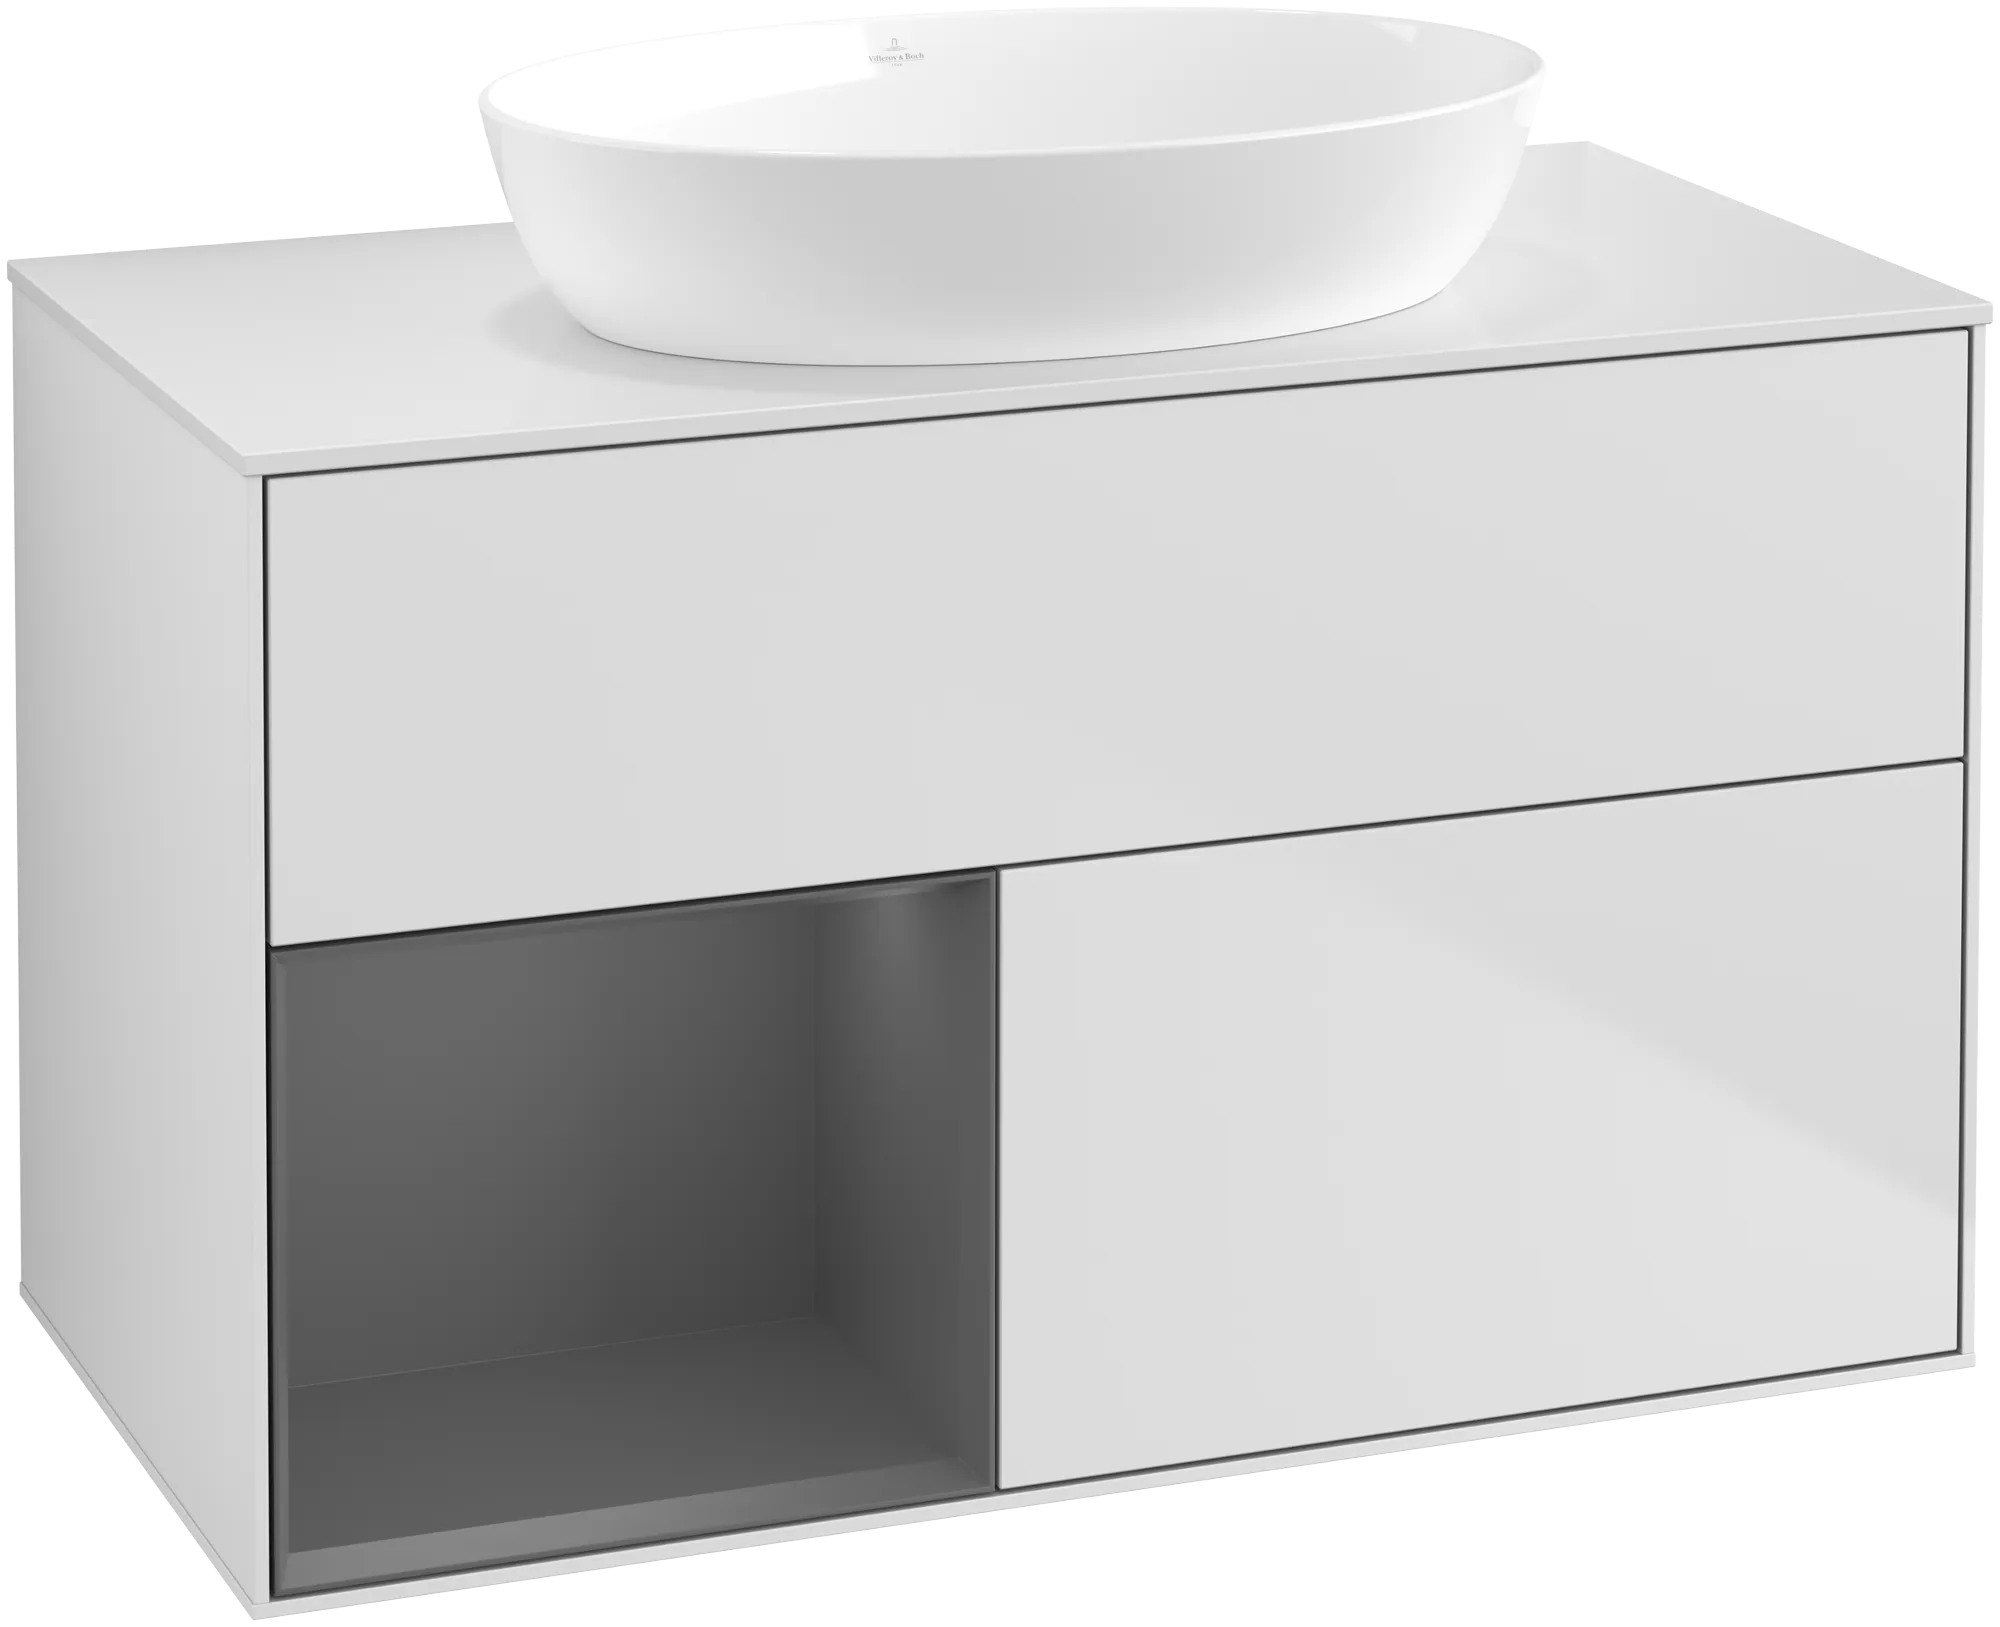 Picture of VILLEROY BOCH Finion Vanity unit, with lighting, 2 pull-out compartments, 1000 x 603 x 501 mm, White Matt Lacquer / Anthracite Matt Lacquer / Glass White Matt #GA11GKMT